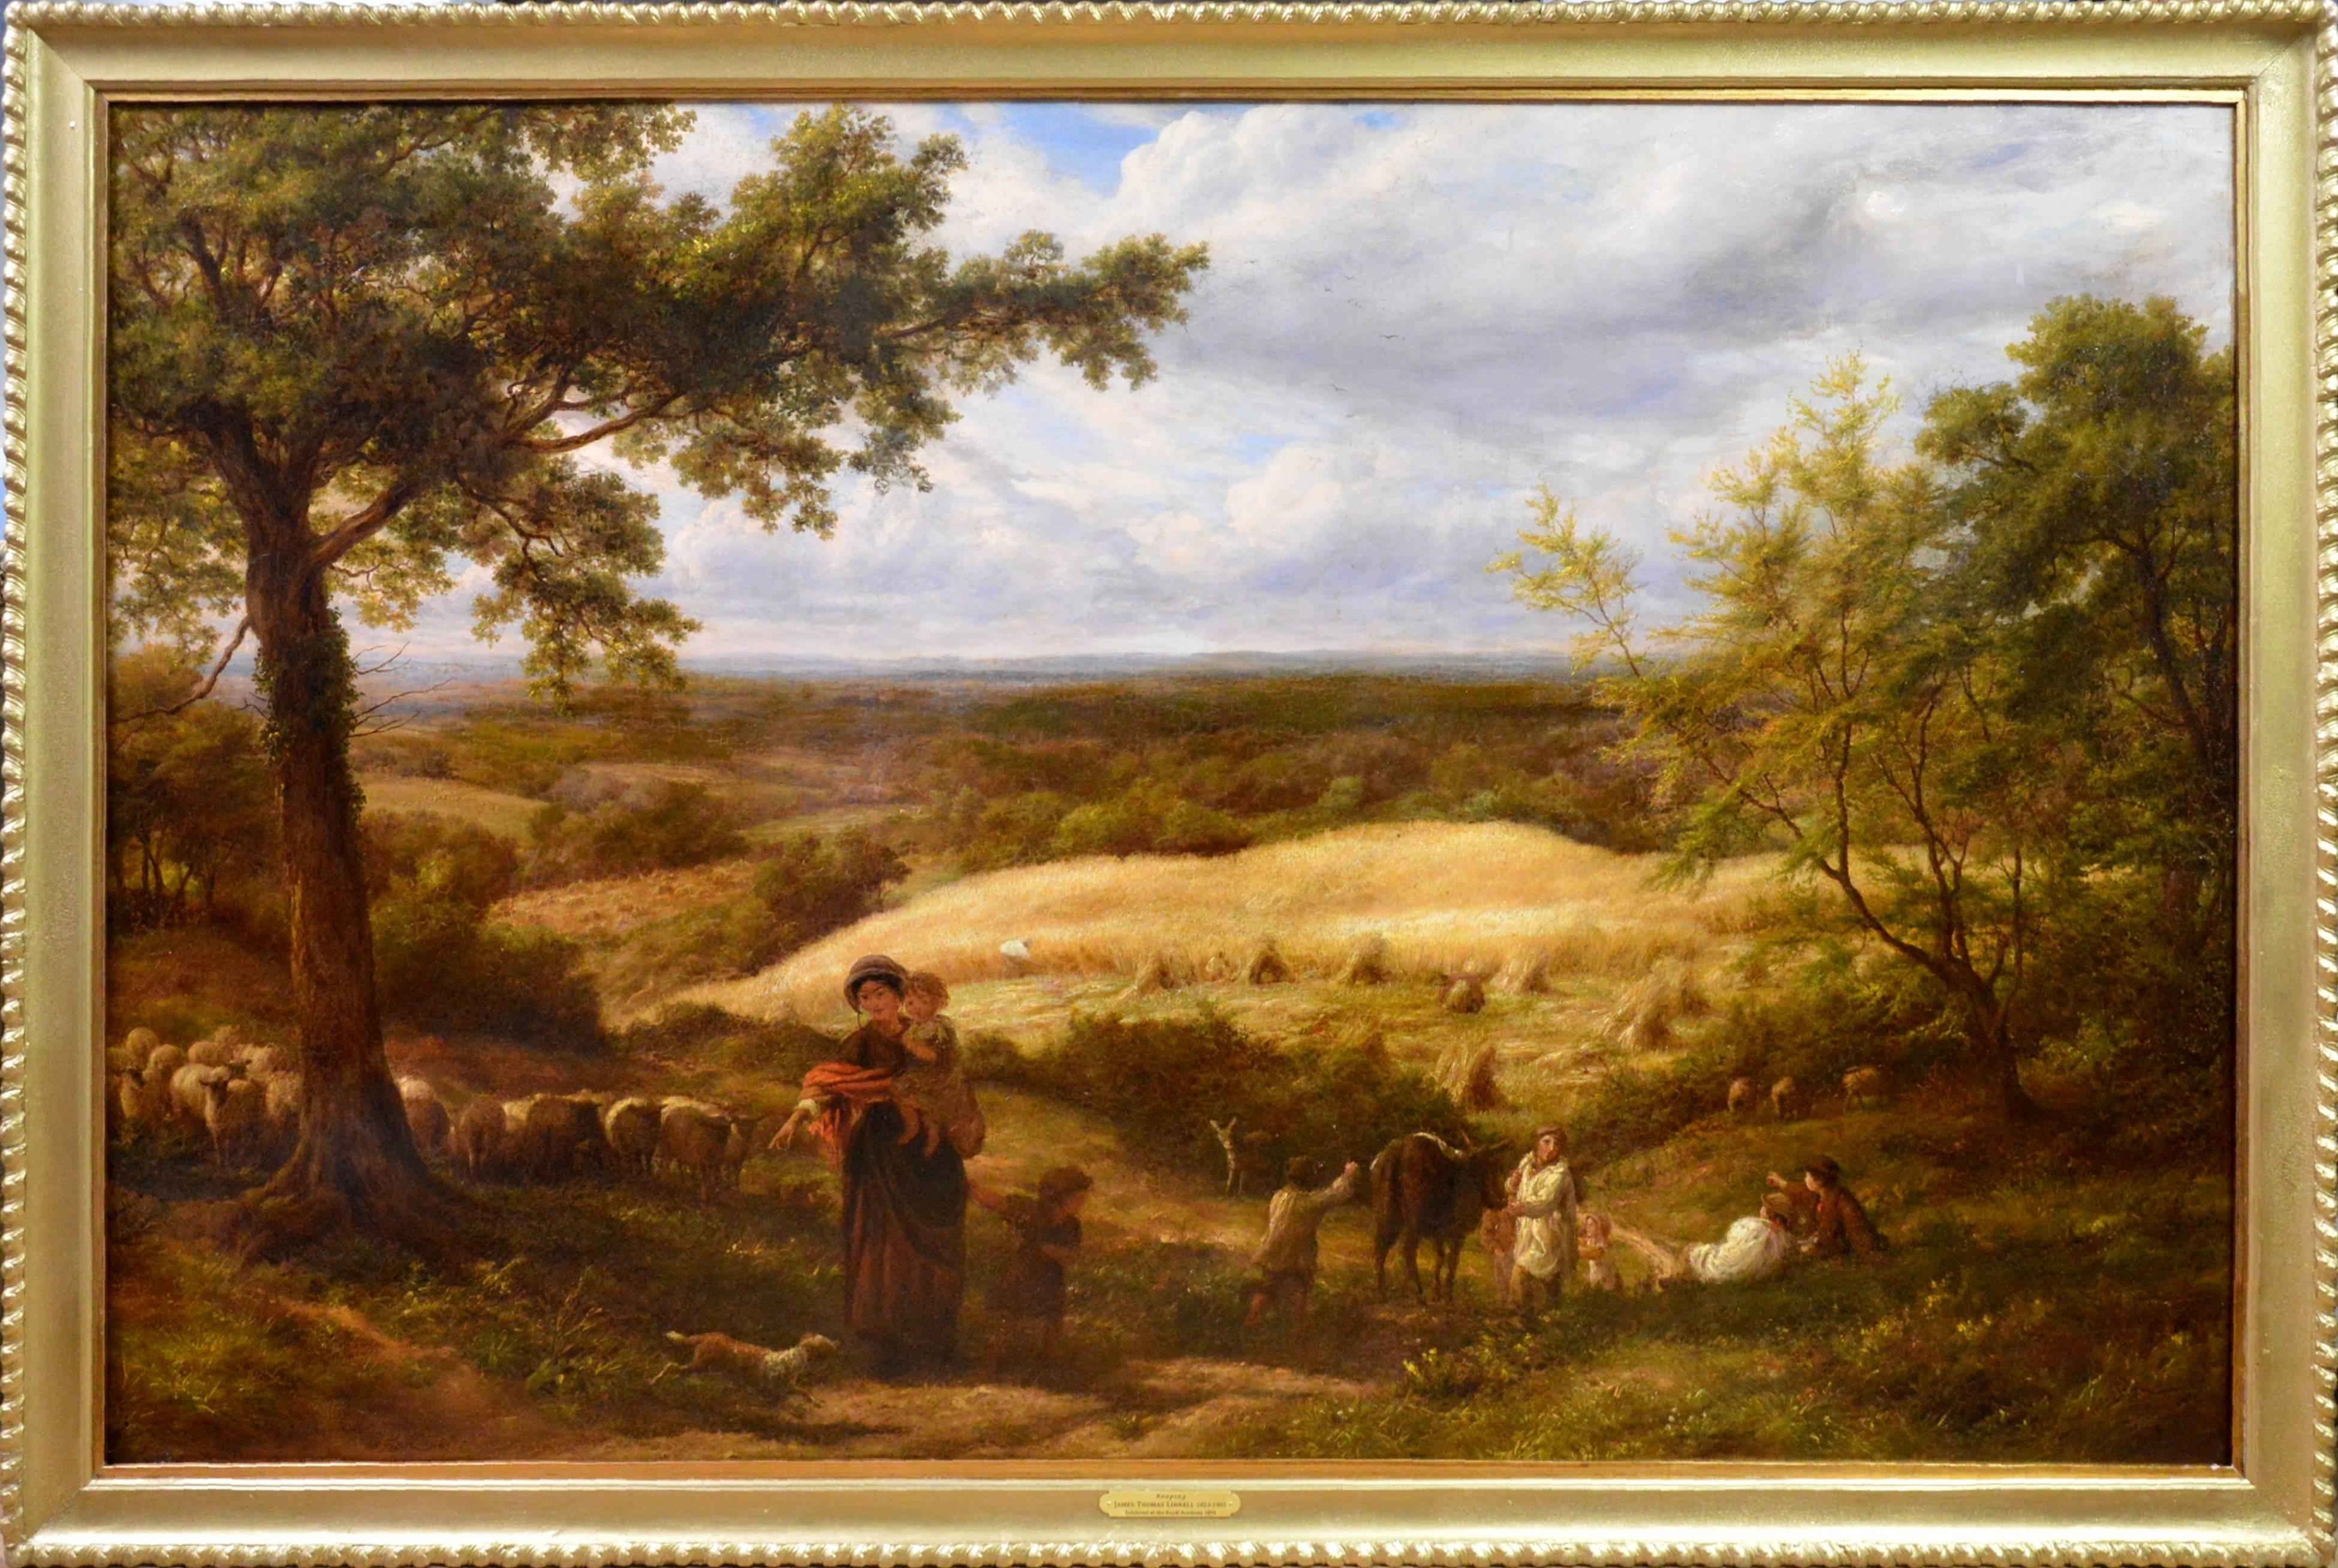 James Thomas Linnell Figurative Painting - Reaping - Very Large 19th Century Oil Painting - Royal Academy 1870 - Linnell